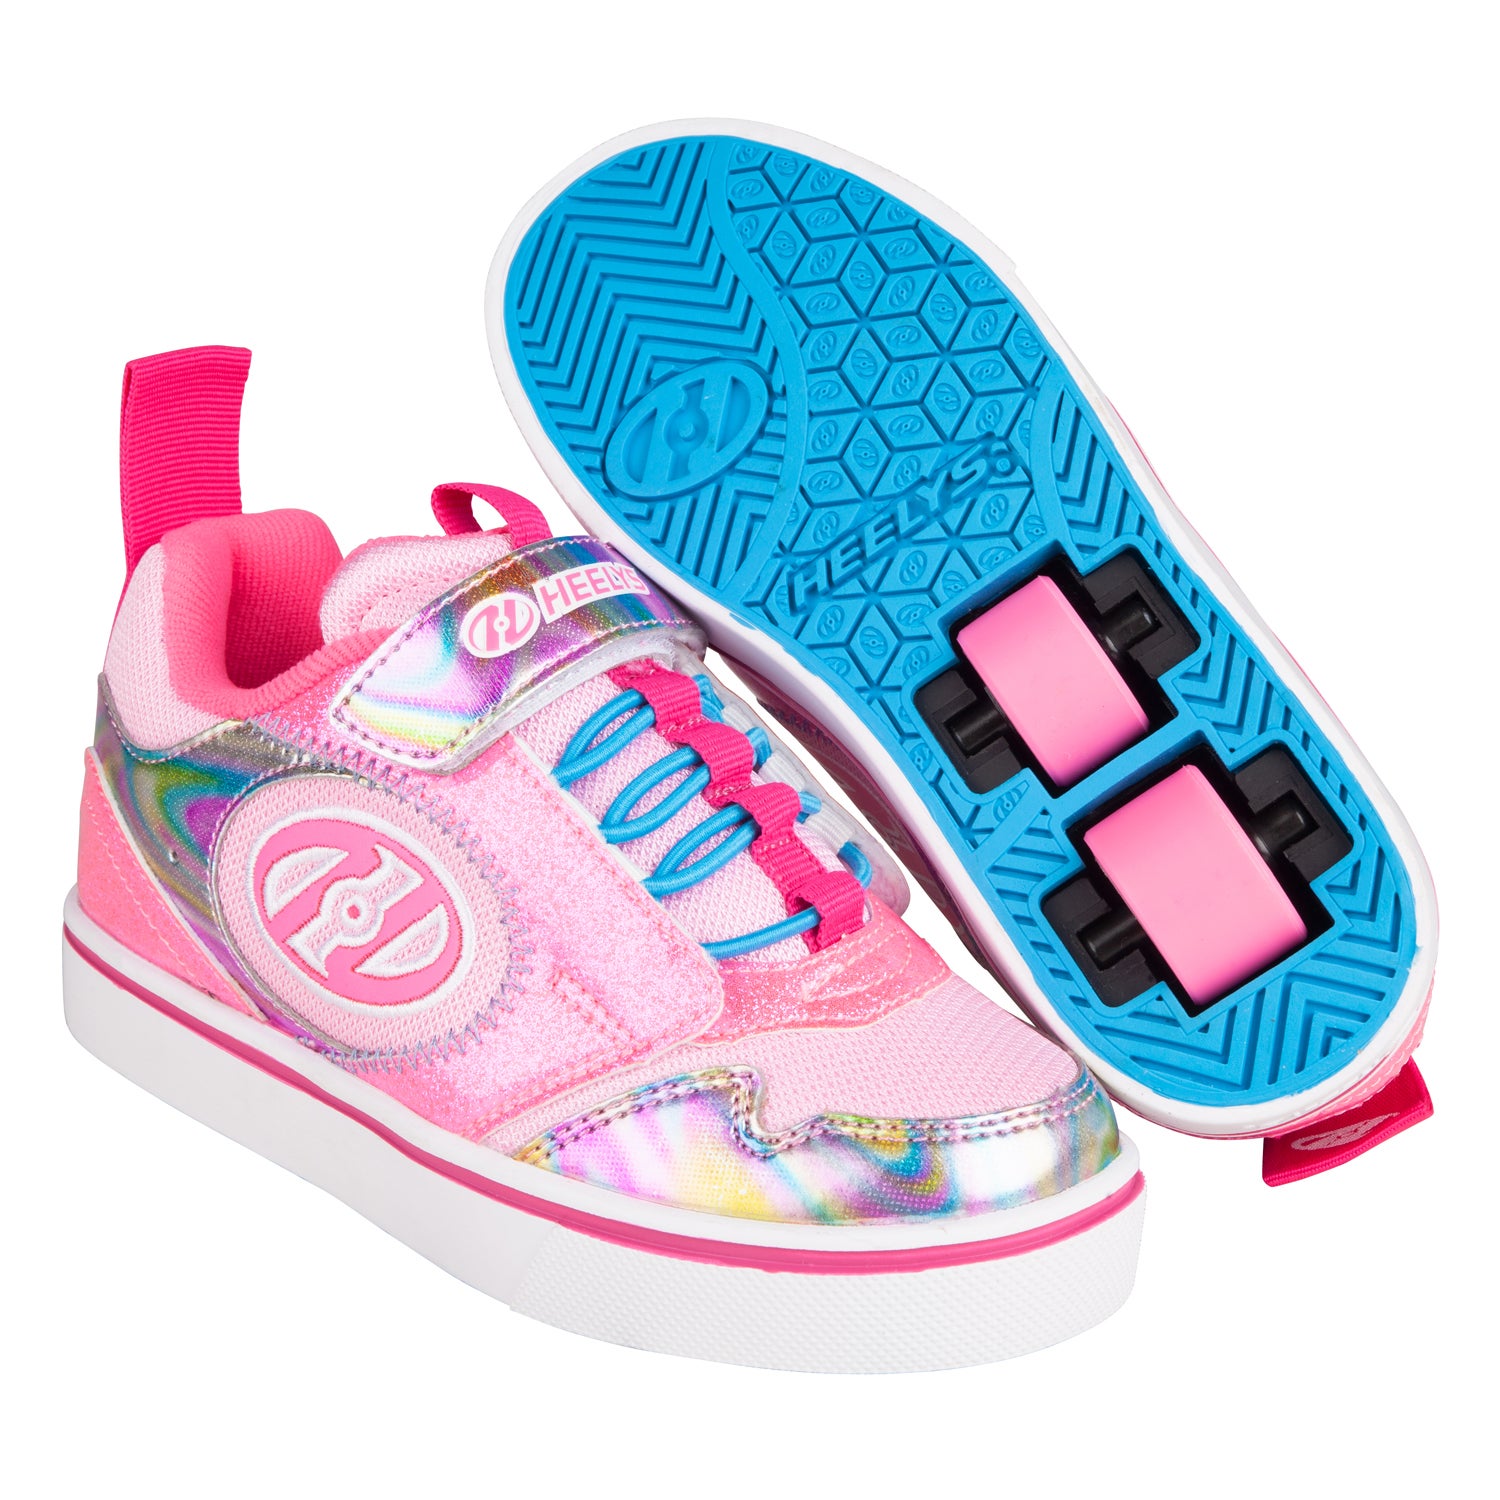 Heelys Girls Heelys Size 1  Sparkly With Purple and White Colours 